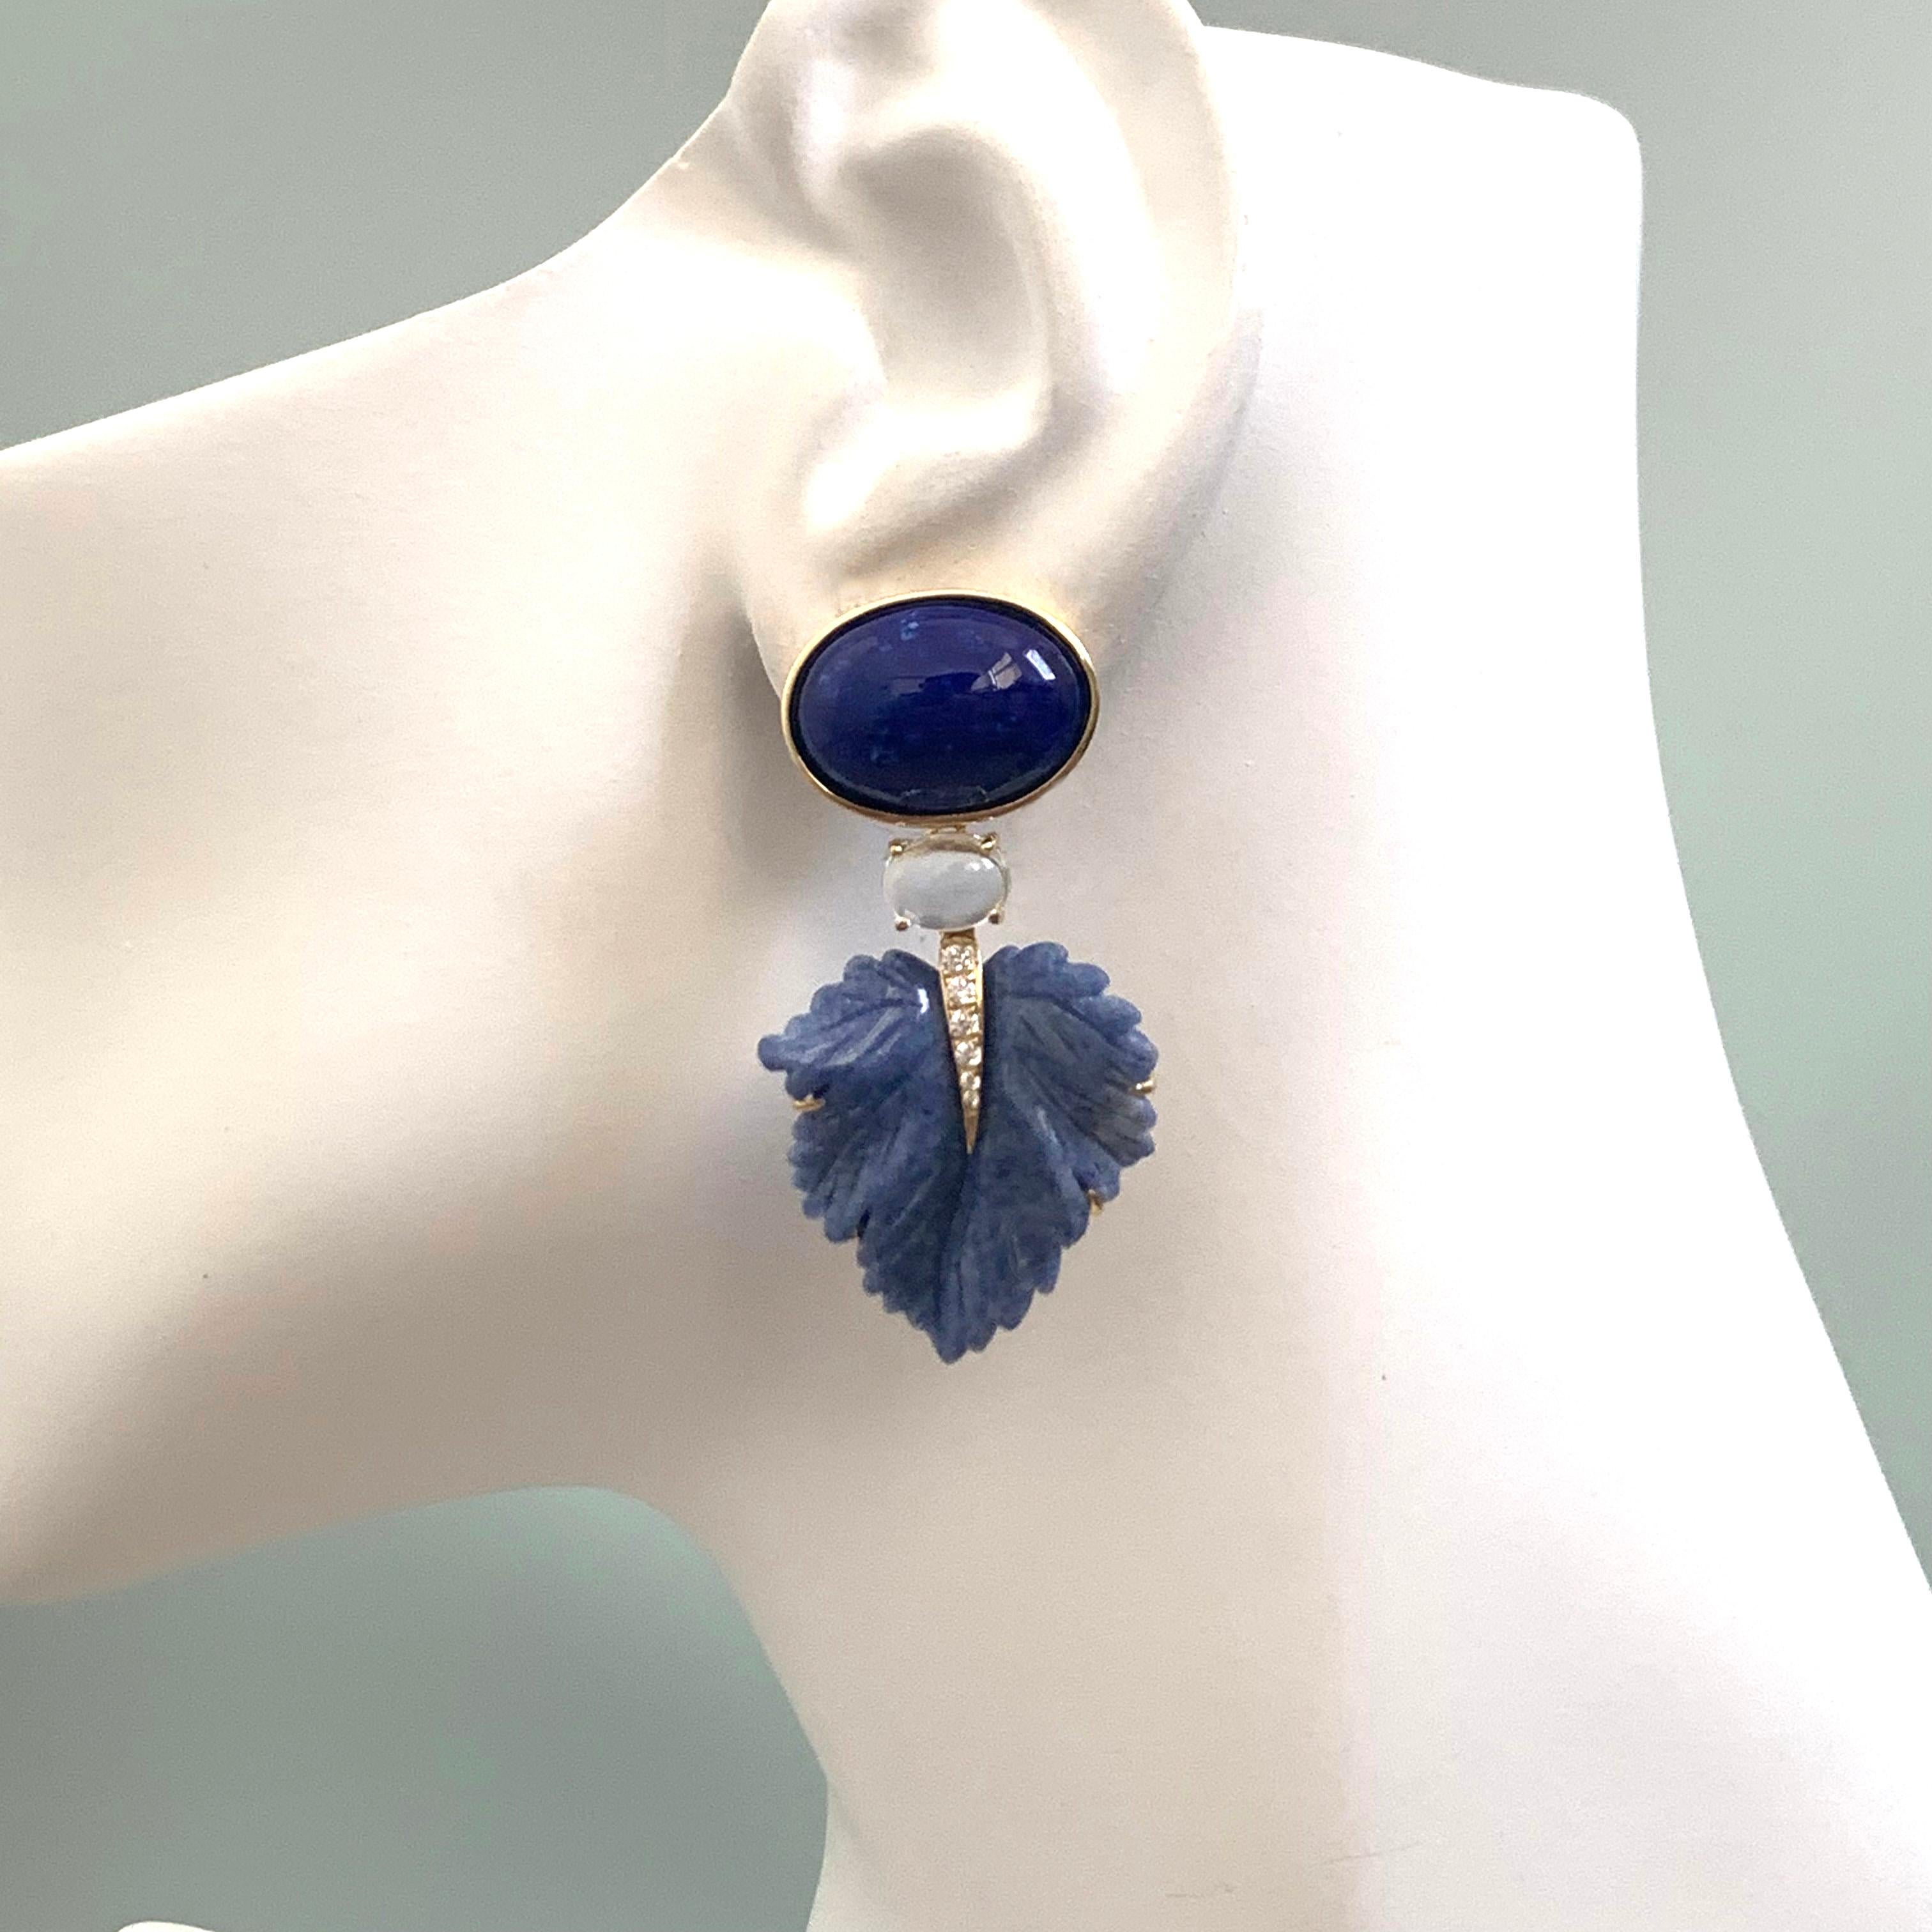 Women's Stunning Cabochon Lapis Lazuli and Carved Blue Dumortierite Leaf Drop Earrings